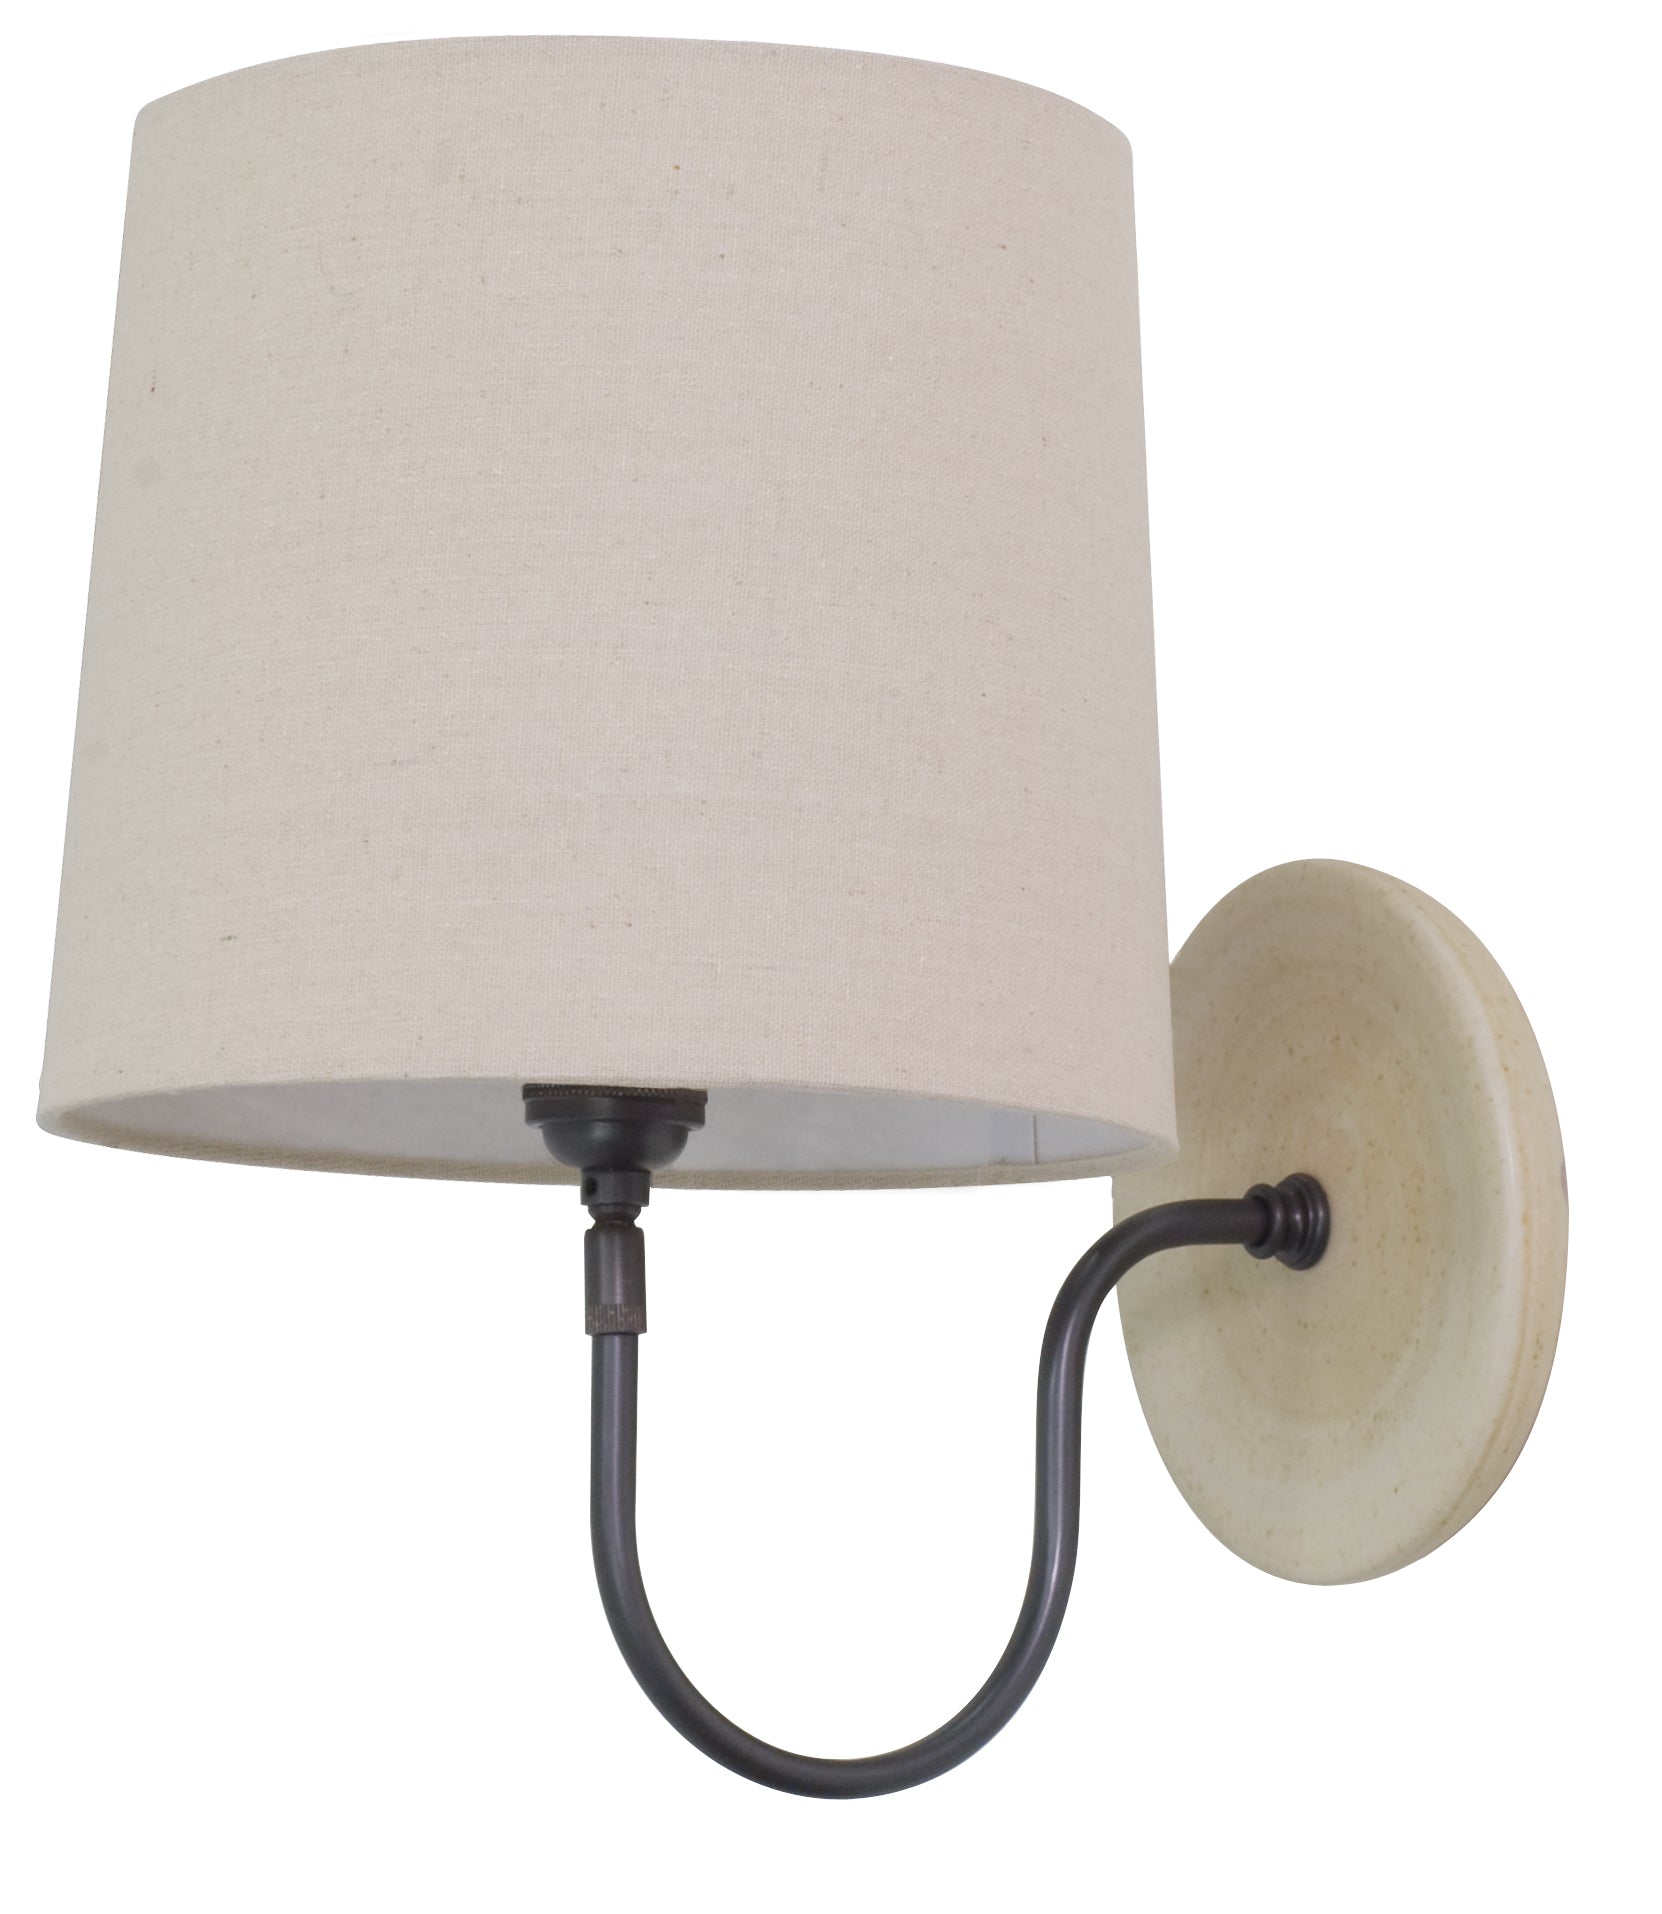 House of Troy Scatchard Wall Lamp in Oatmeal GS725-OT